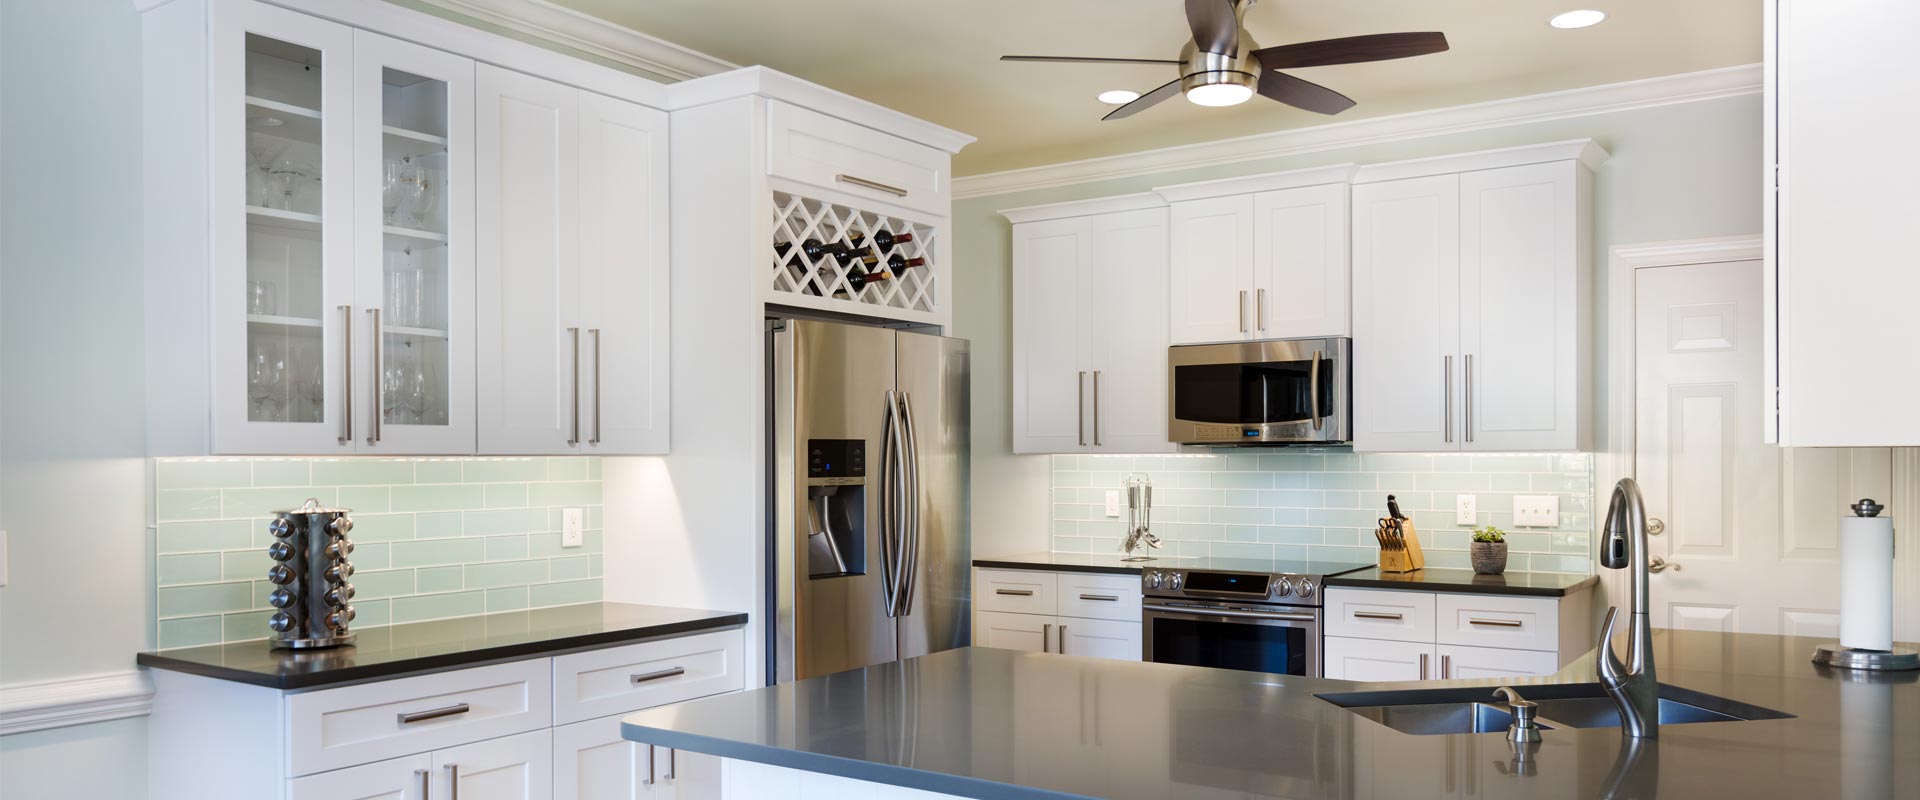 Kitchen Bath Of Wilmington Remodeling Countertops Cabinets